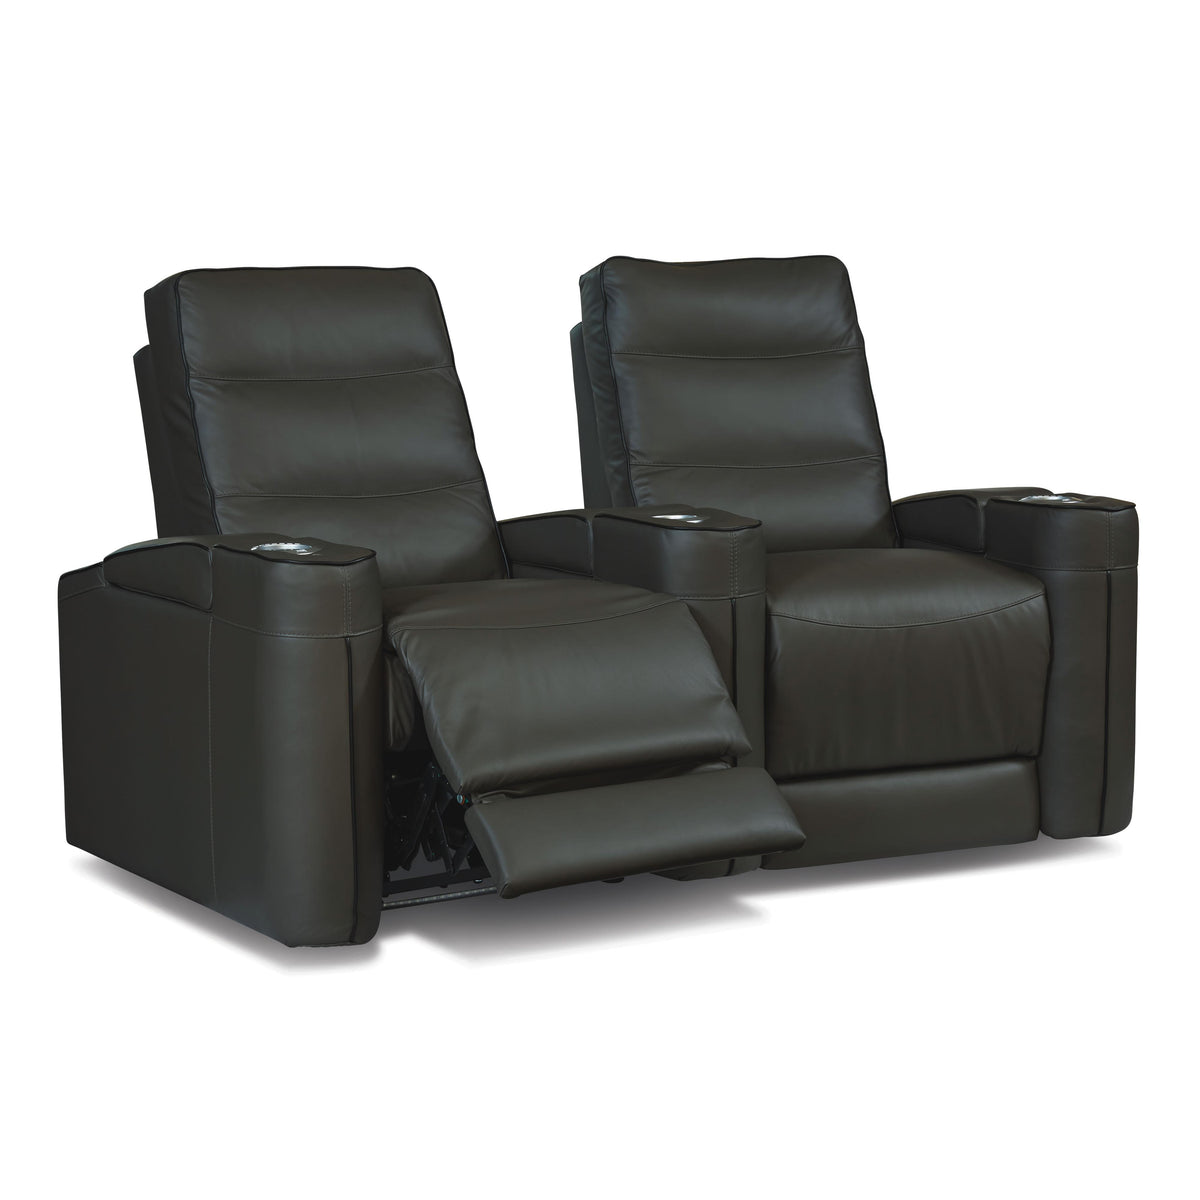 Beckett Leather 2-Seat Home Theatre Seating IMAGE 1